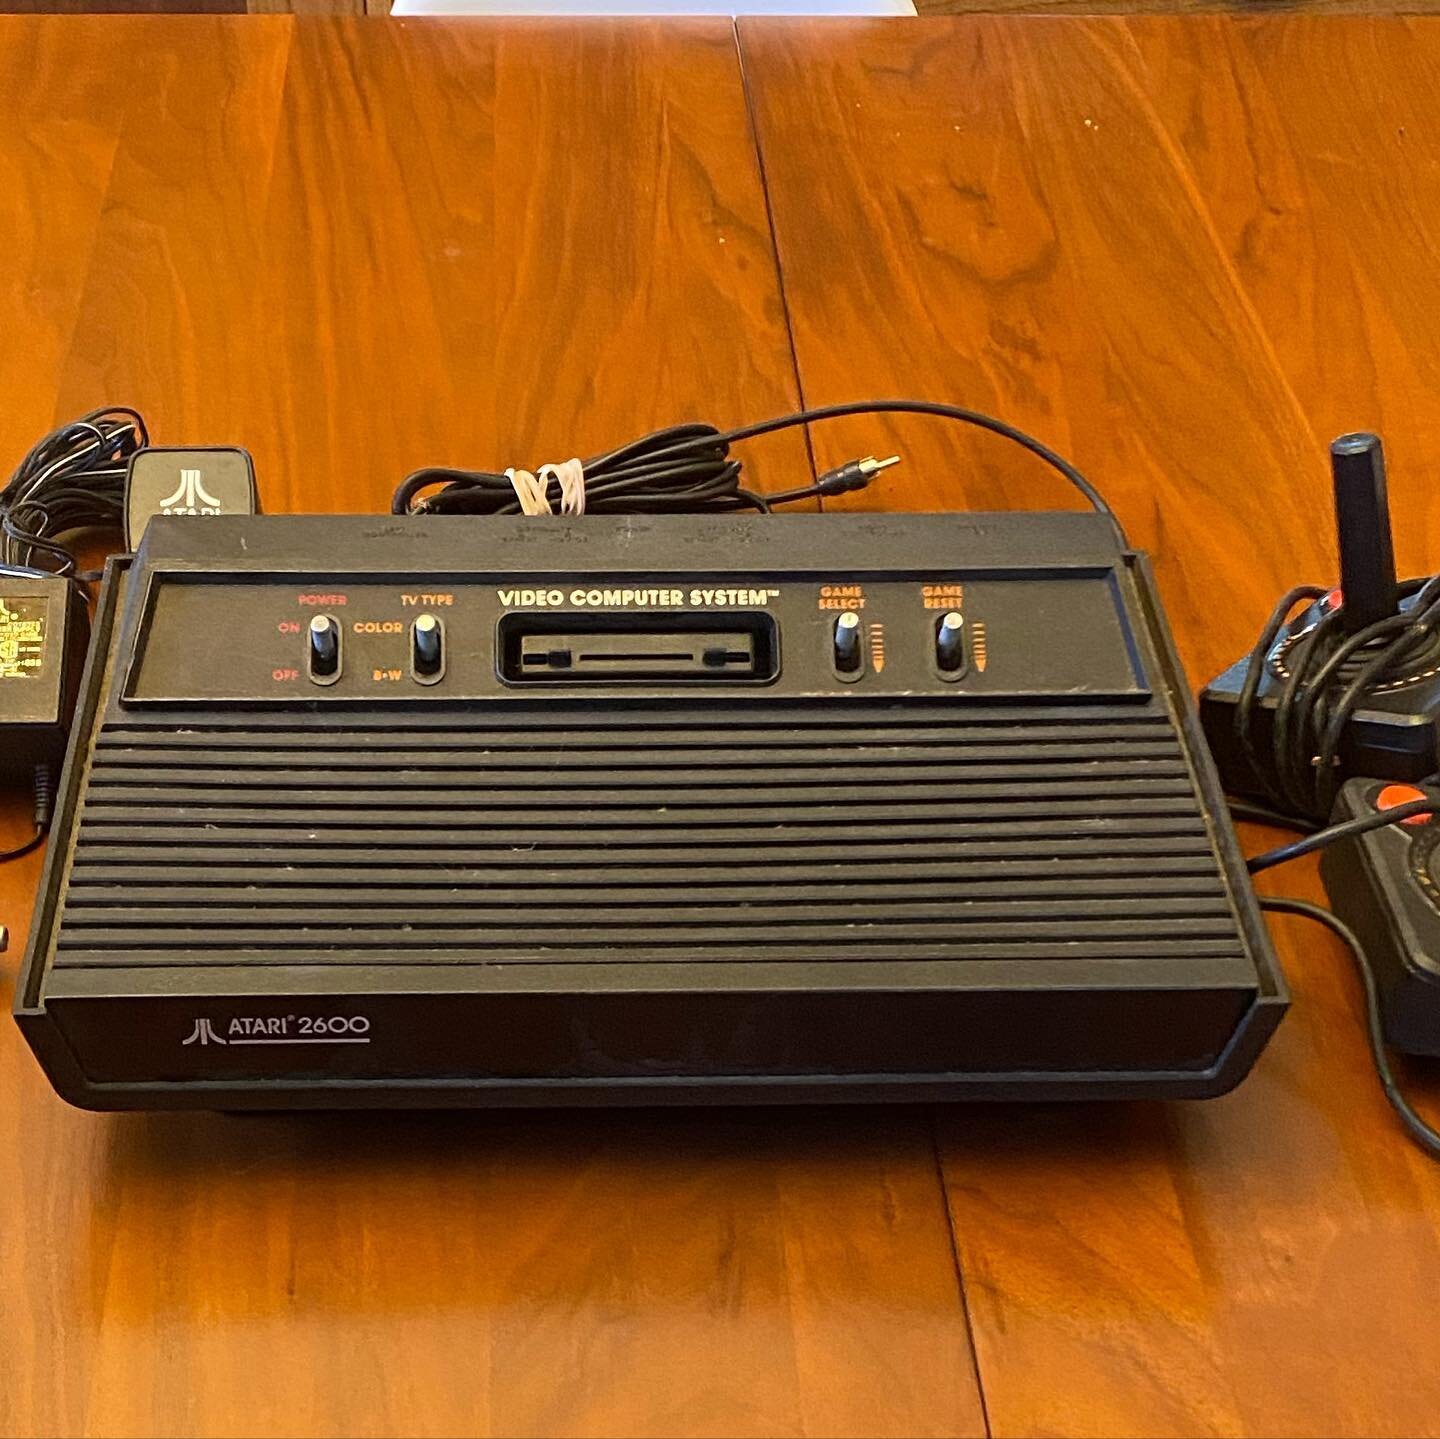 It has been a busy last few months for the Center. In addition to hosting Dr. Ashley Bird and her talk about Native American Representations in Video Games, we acquired a few new pieces for the archive including a very dirty Atari VCS (1983 so called